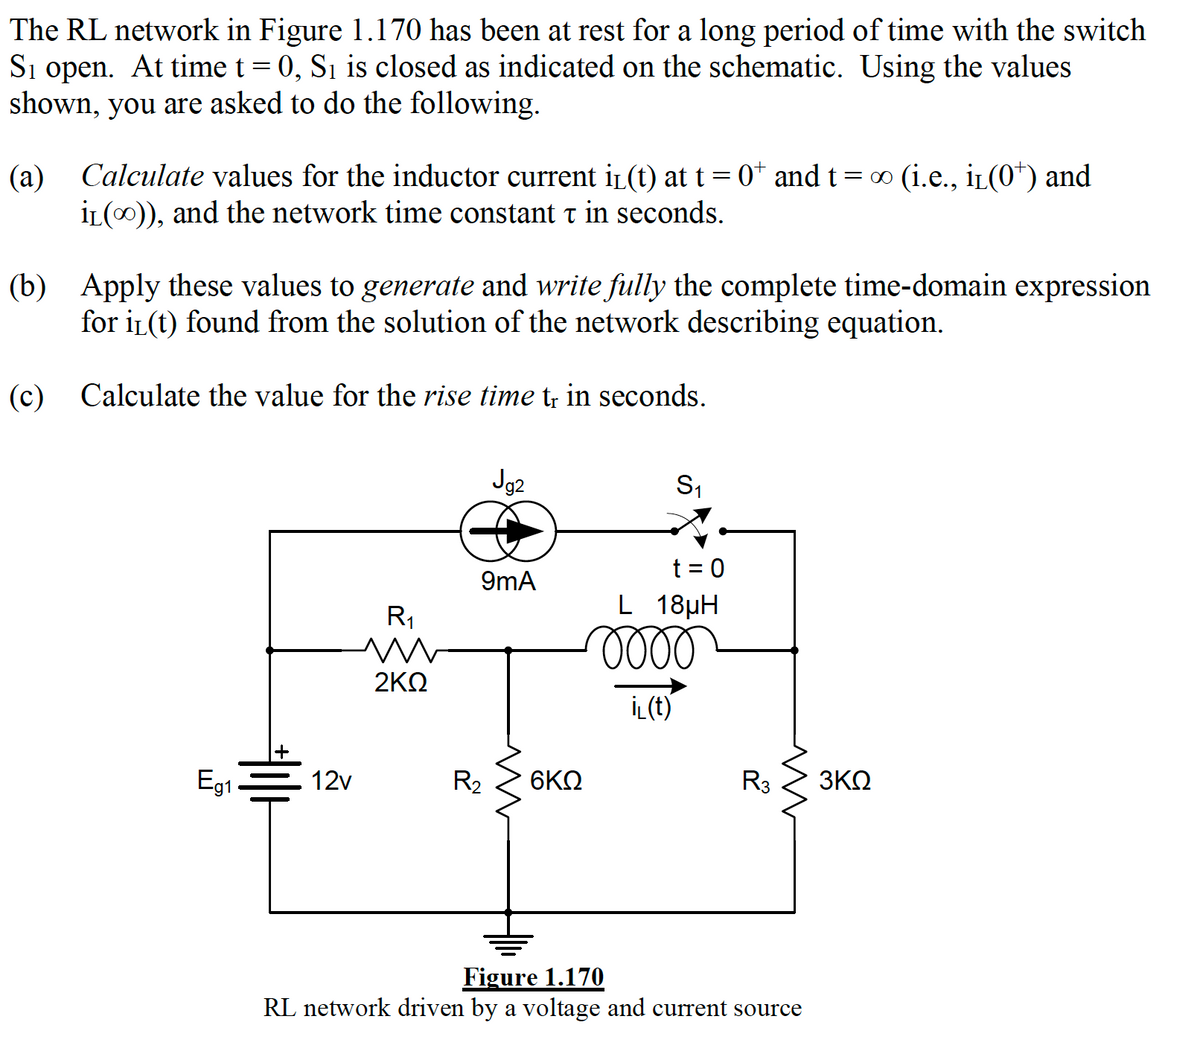 The RL network in Figure 1.170 has been at rest for a long period of time with the switch
Si open. At time t = 0, Sı is closed as indicated on the schematic. Using the values
shown, you are asked to do the following.
(a) Calculate values for the inductor current iL(t) at t = 0* and t=∞ (i.e., iL(0*) and
İL(0)), and the network time constant t in seconds.
(b) Apply these values to generate and write fully the complete time-domain expression
for iL(t) found from the solution of the network describing equation.
(c) Calculate the value for the rise time t; in seconds.
Jg2
S1
t = 0
L 18µH
lell
9mA
R1
2KΩ
İL(t)
Eg1
12v
R2
6ΚΩ
R3
3ΚΩ
Figure 1.170
RL network driven by a voltage and current source
